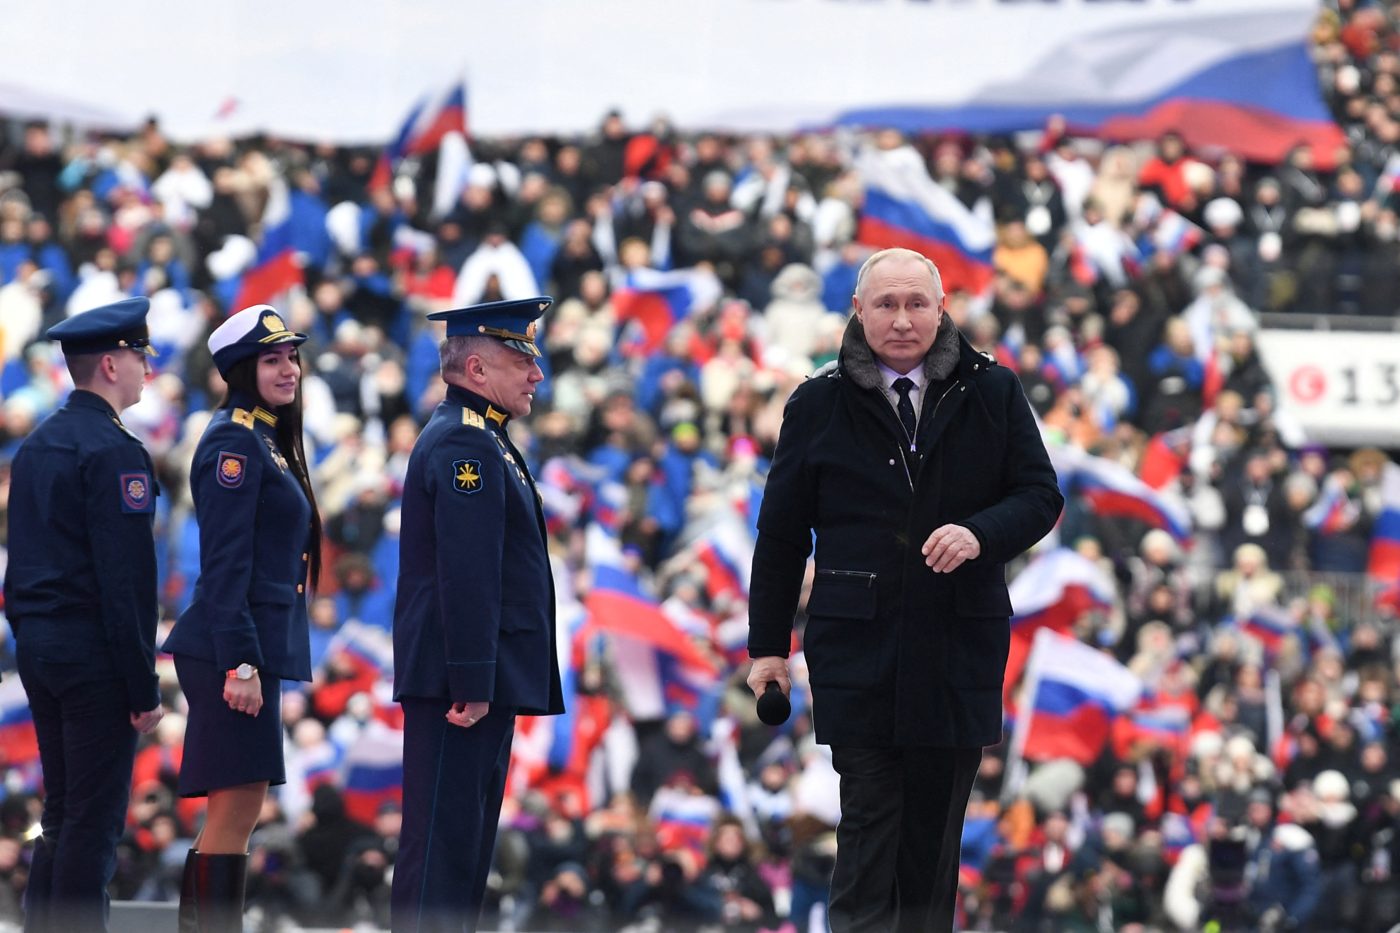 Photo: Russian President Vladimir Putin attends a concert dedicated to Russian service members involved in the country's military campaign in Ukraine, on the eve of the Defender of the Fatherland Day at Luzhniki Stadium in Moscow, Russia February 22, 2023. Credit: Sputnik/Maksim Blinov/Kremlin